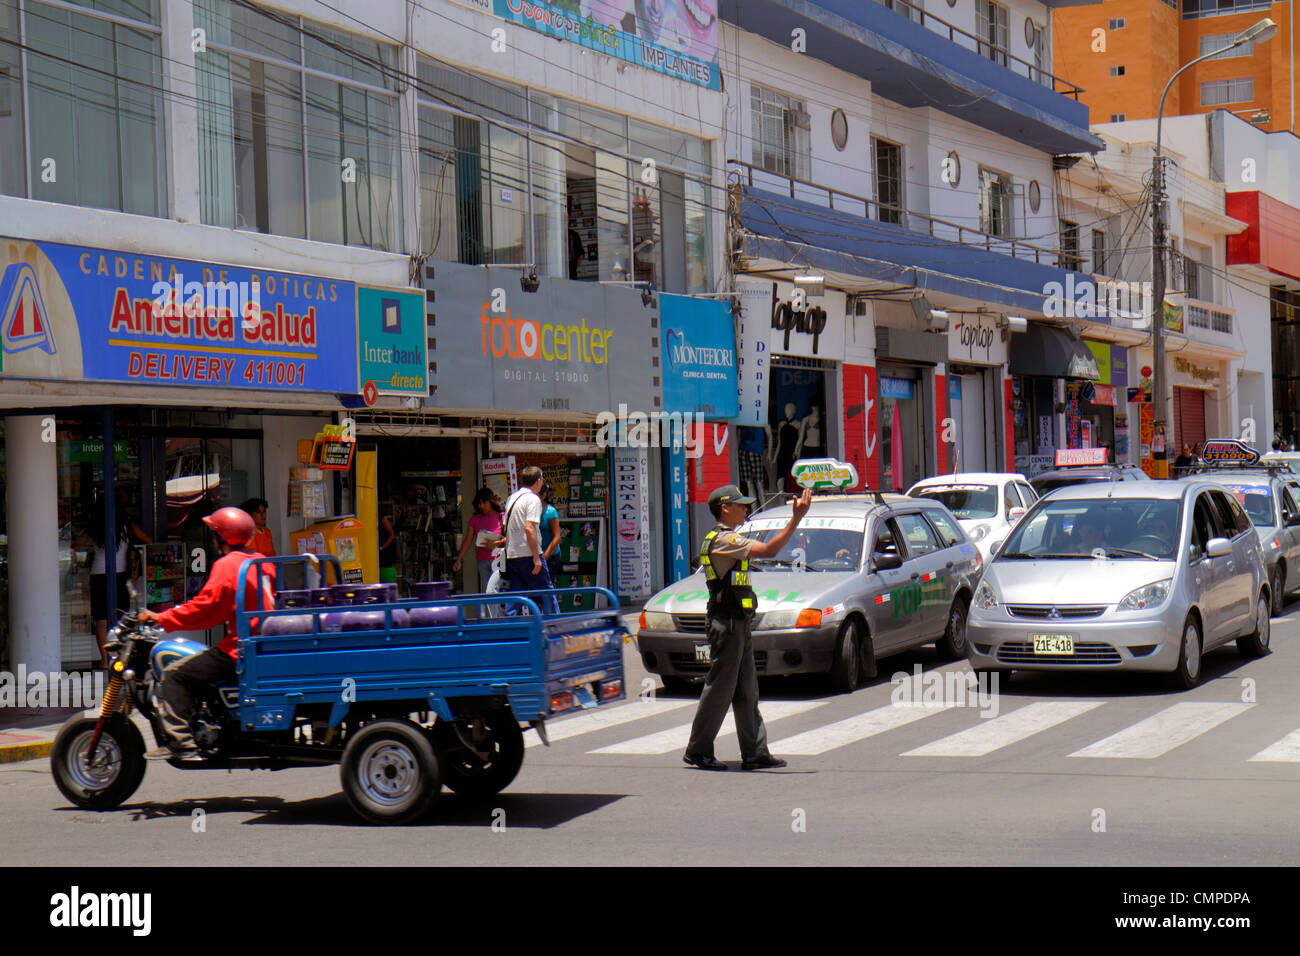 Tacna Peru,Calle San Martin,commercial district,storefront,street scene,traffic,stopped,tricycle,cart,car,Hispanic man men male adult adults,traffic,c Stock Photo